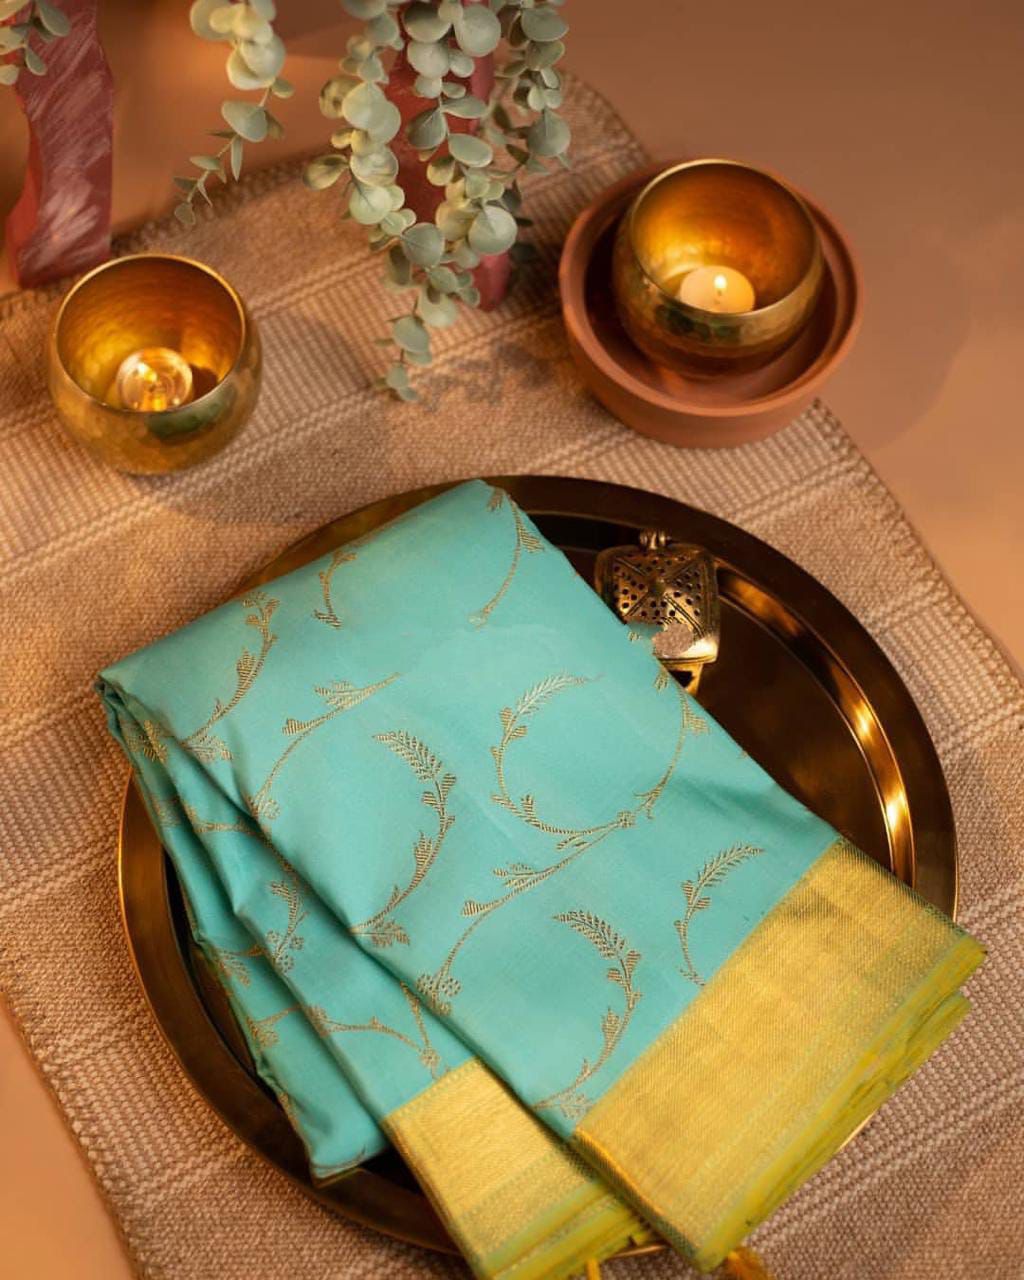 Elevate Your Style with Stunning Banarasi Saree Blouse Designs